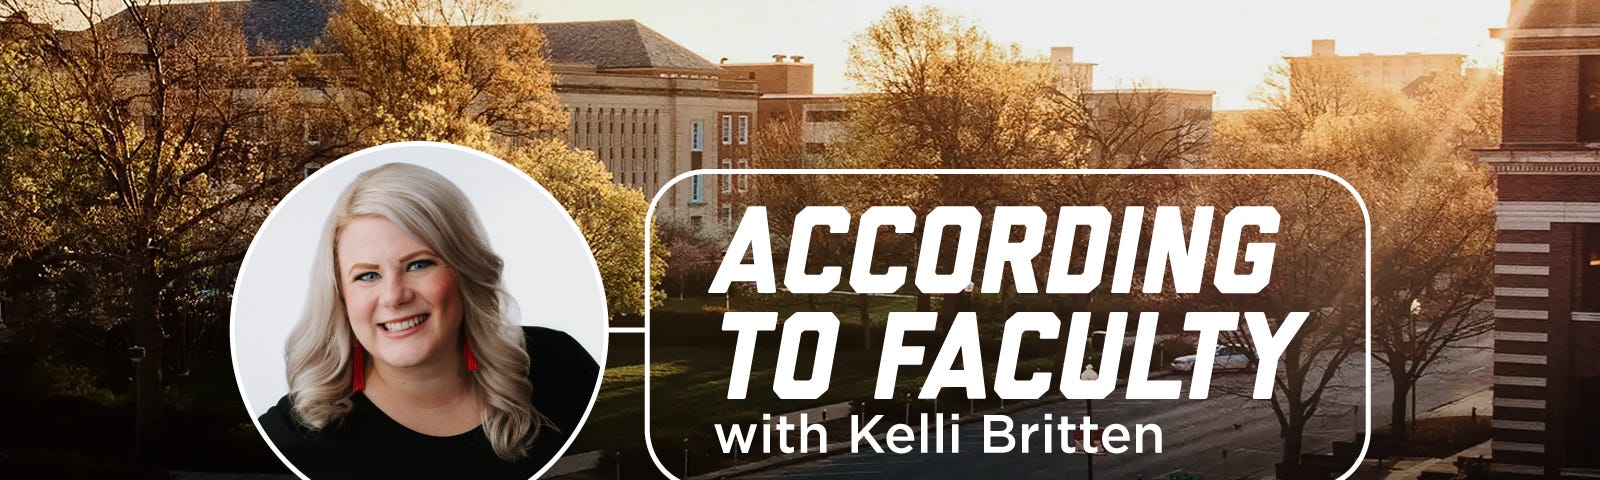 A photo of Kelli set over a photo of campus with text that reads “According to Faculty with Kelli Britten”